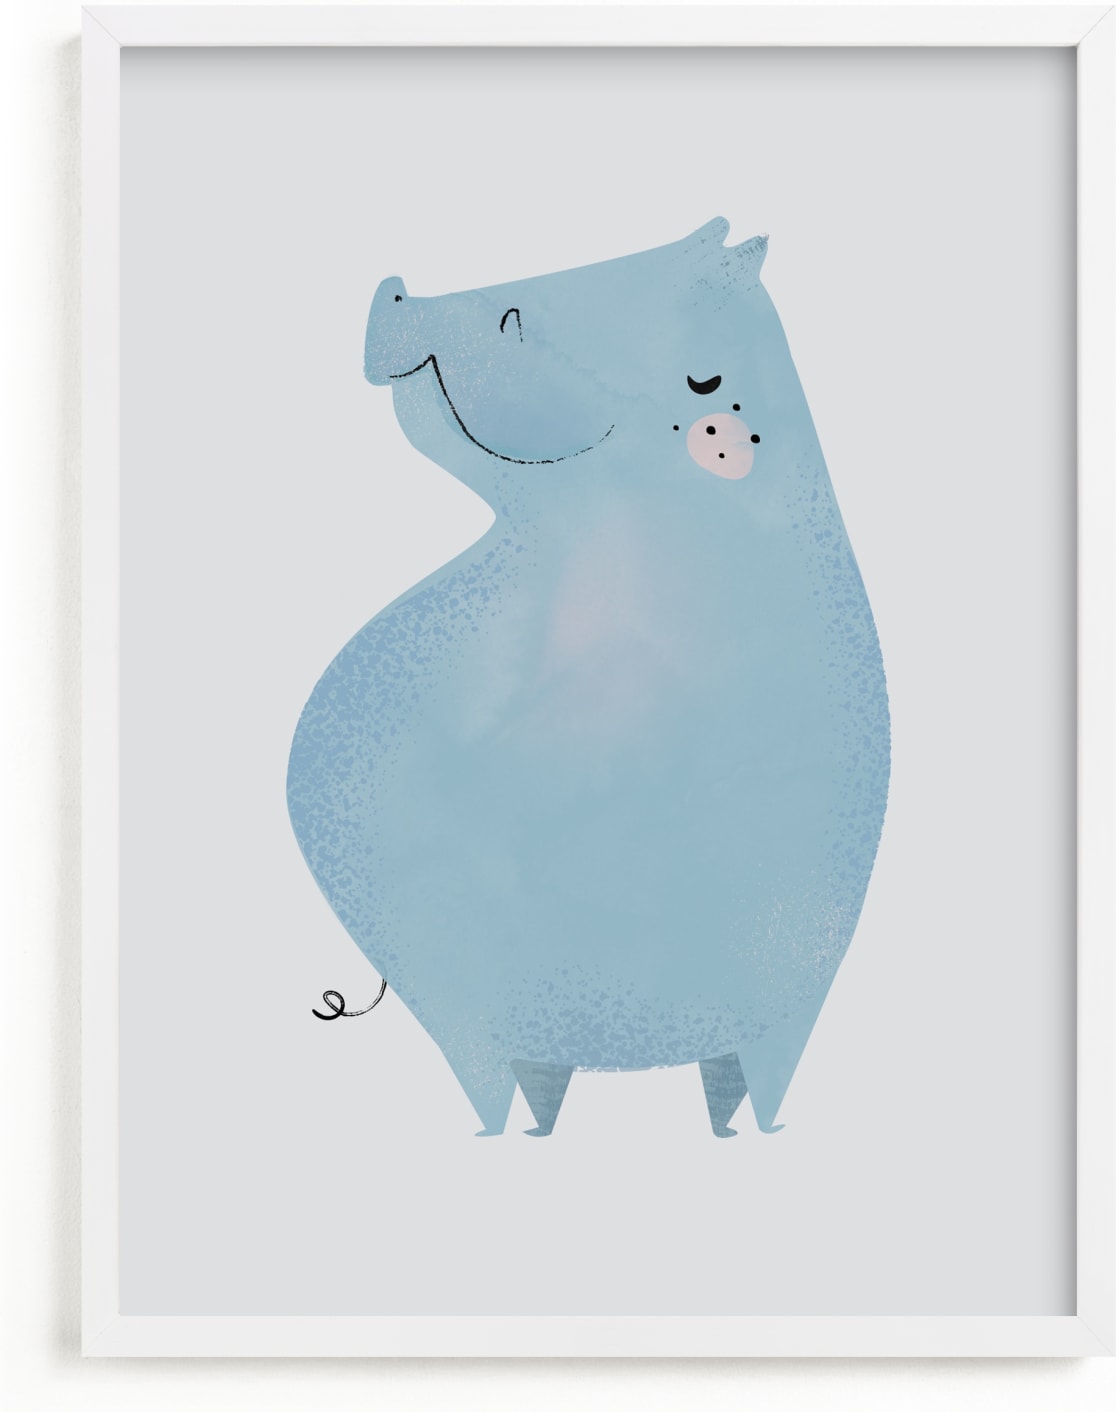 This is a blue kids wall art by Lori Wemple called Hippo.